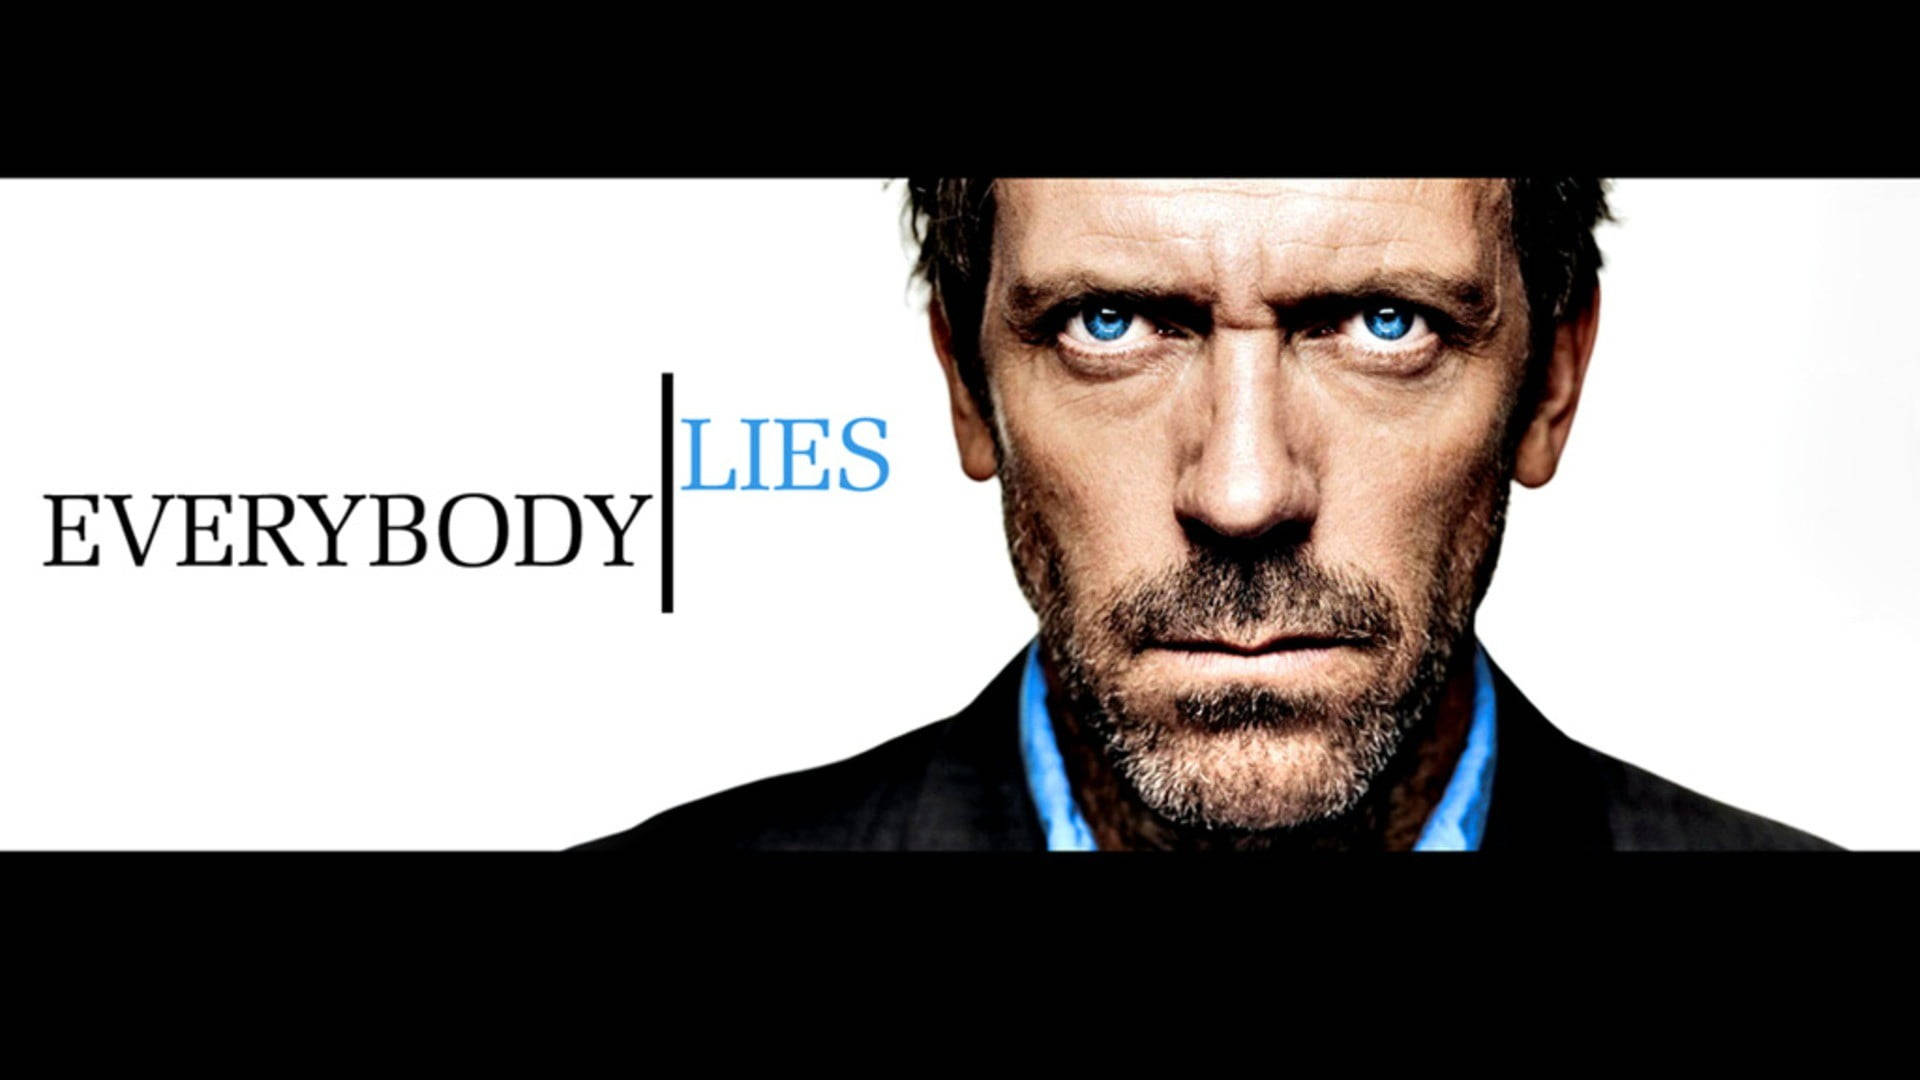 Dr. Gregory House - Everybody Lies